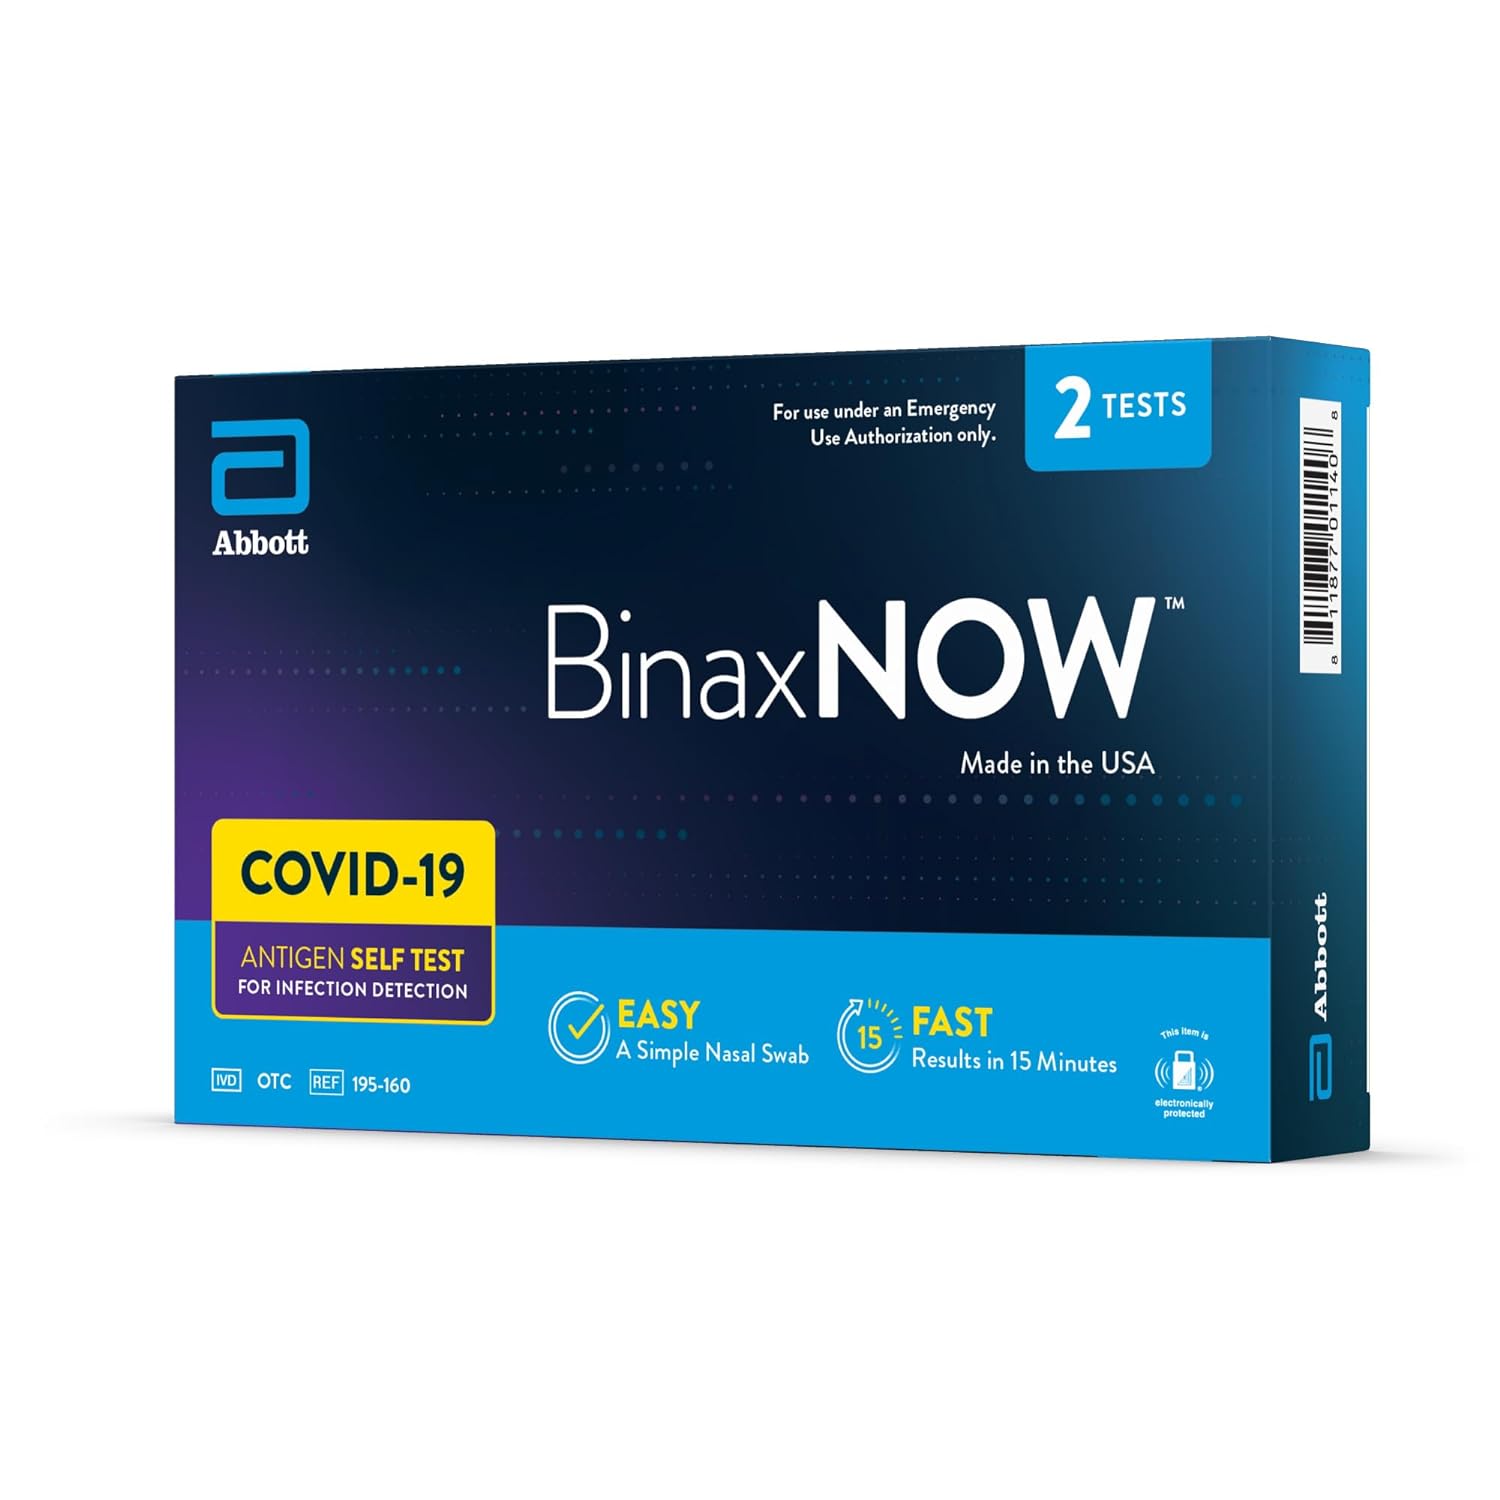 BinaxNOW COVID‐19 Antigen Self Test, 1 Pack, Double, 2-count, At Home COVID-19 Test, 2 Tests - image 12 of 13